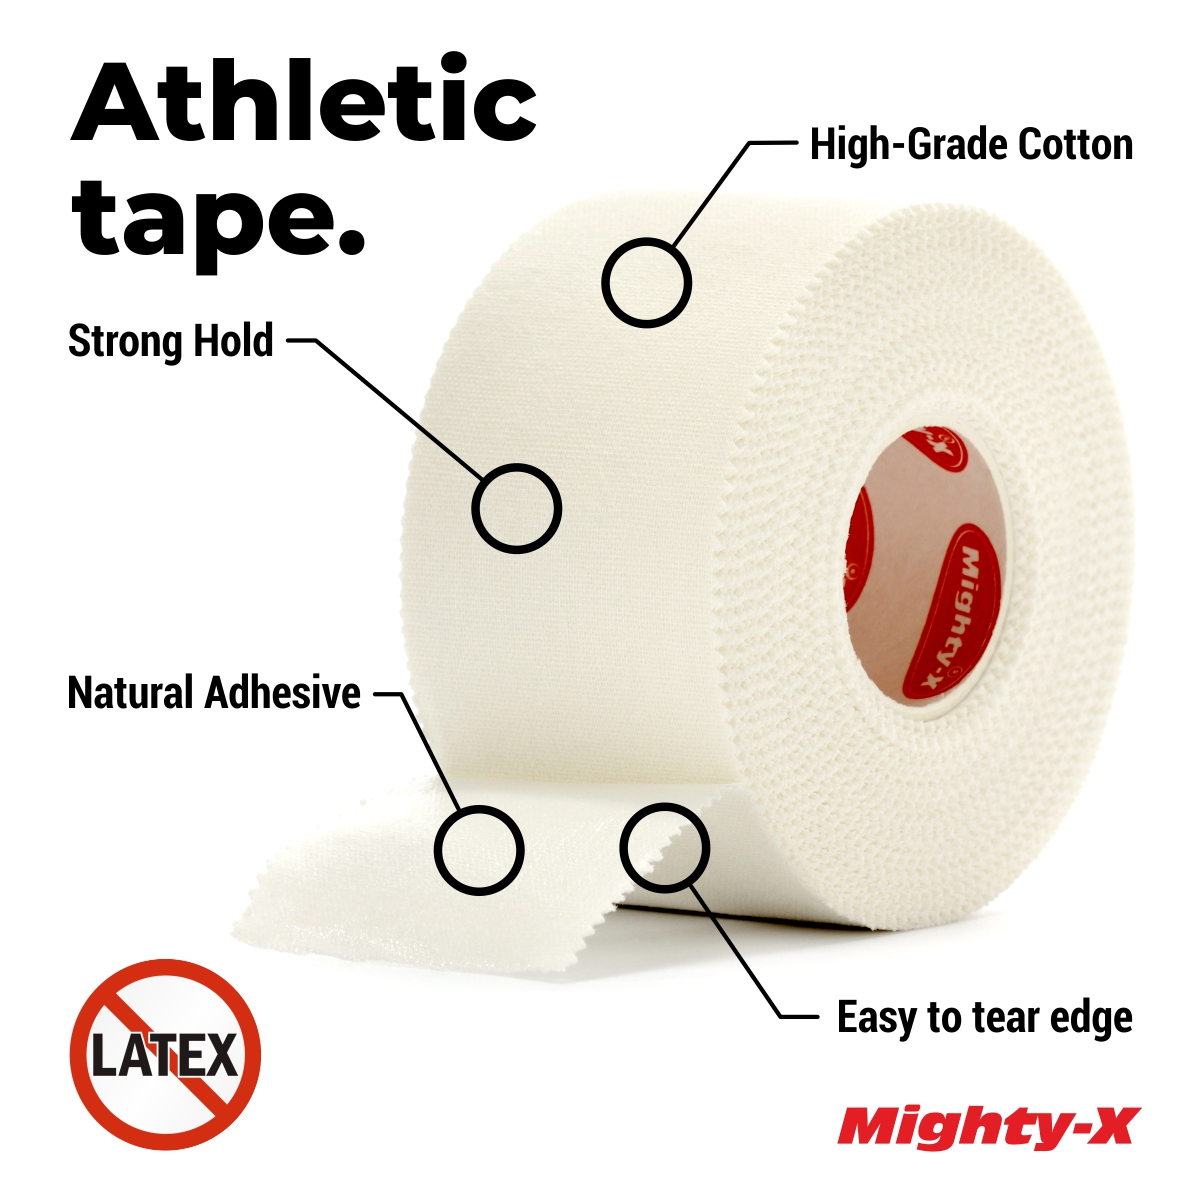  Summum Fit Athletic Tape White Extremely Strong: 3 Rolls + 1  Finger Tape. Easy to Apply & No Sticky Residue. Sports Tape for Boxing,  Football or Climbing. Enhance Wrist, Ankle 